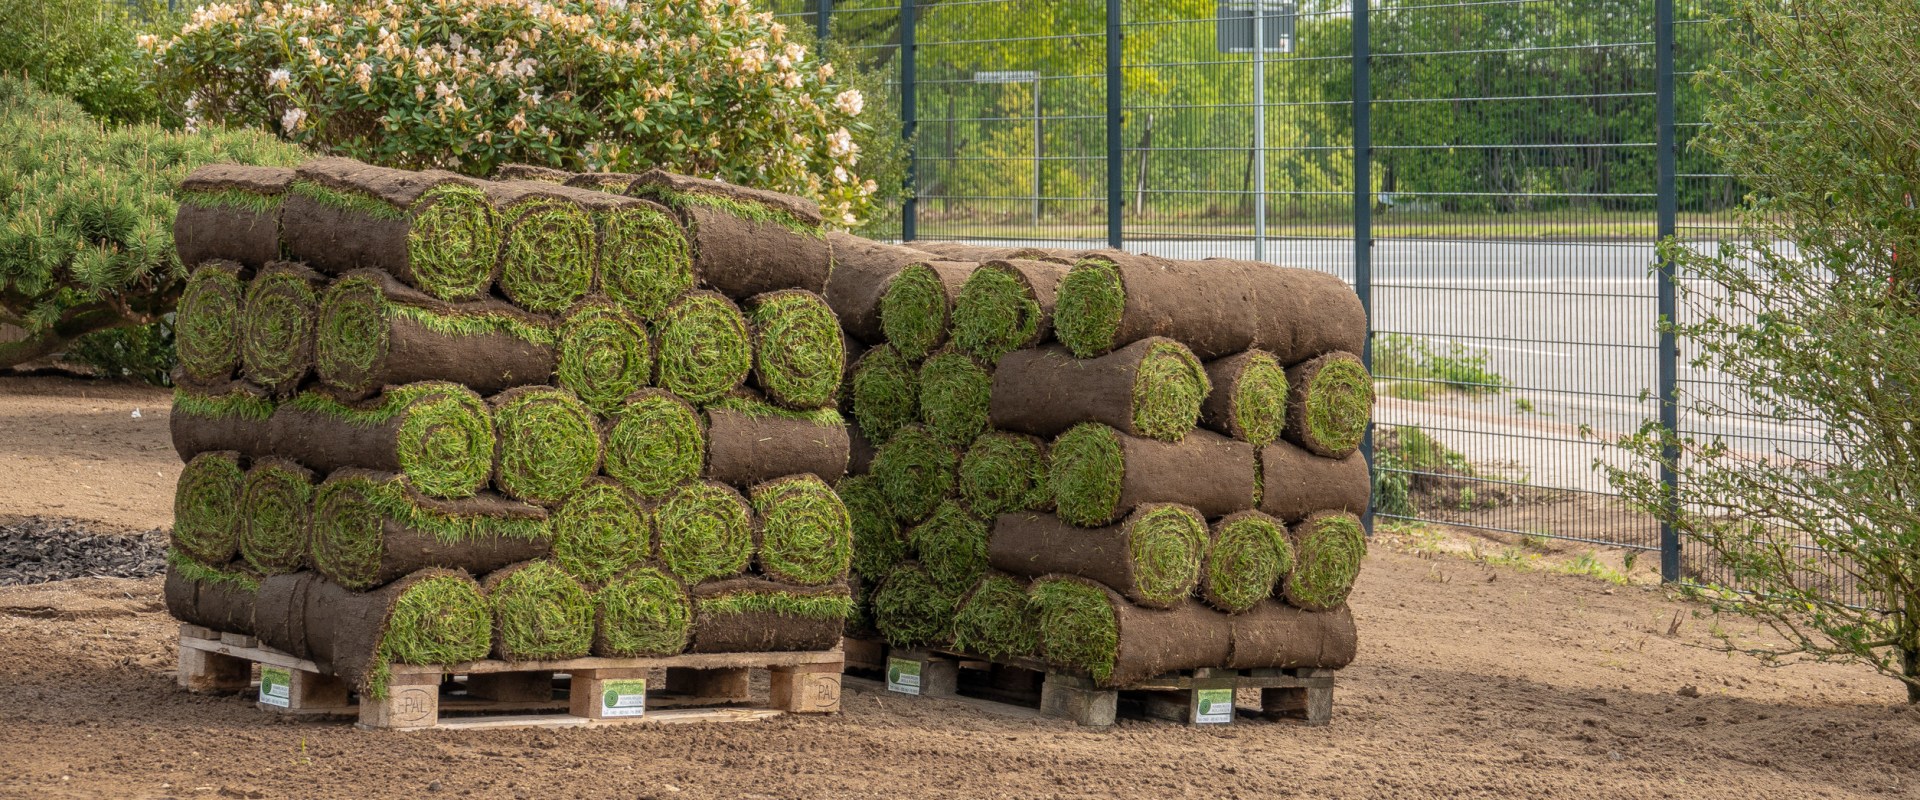 How long can i leave sod on a pallet?